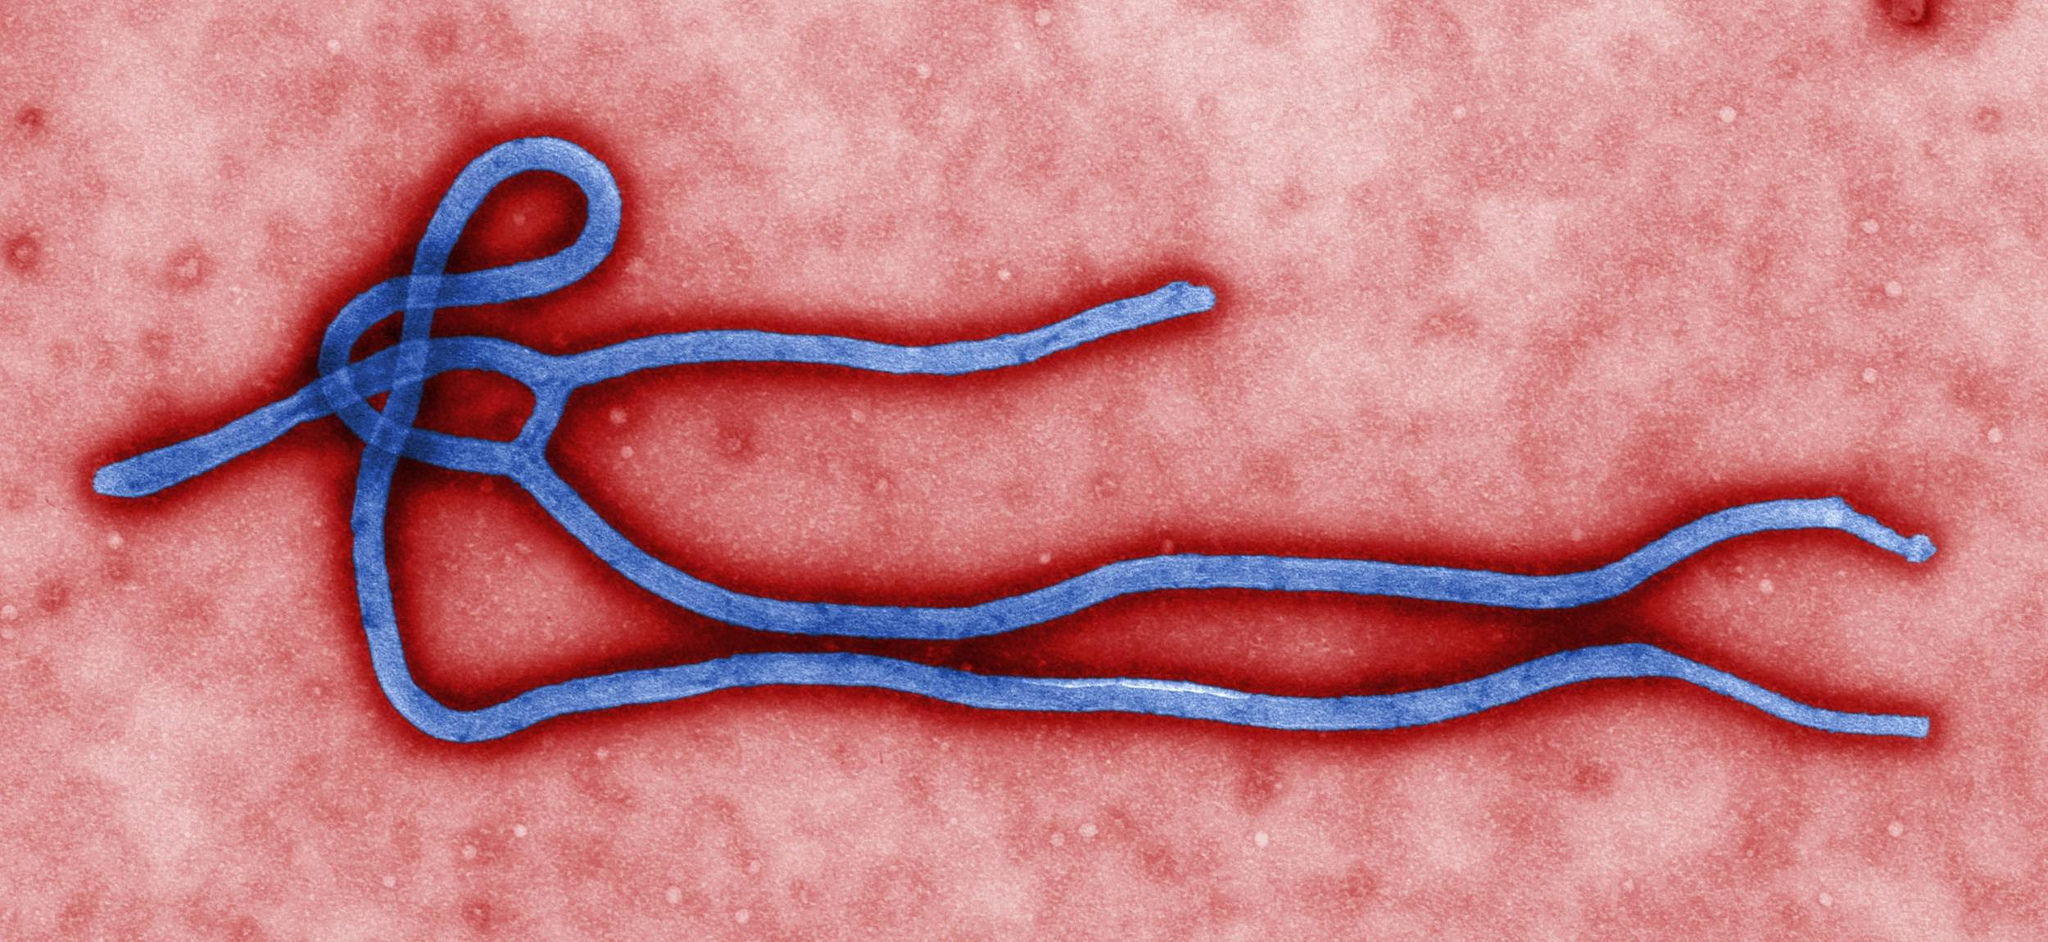 Ebola Anxiety and Mental Terrorism